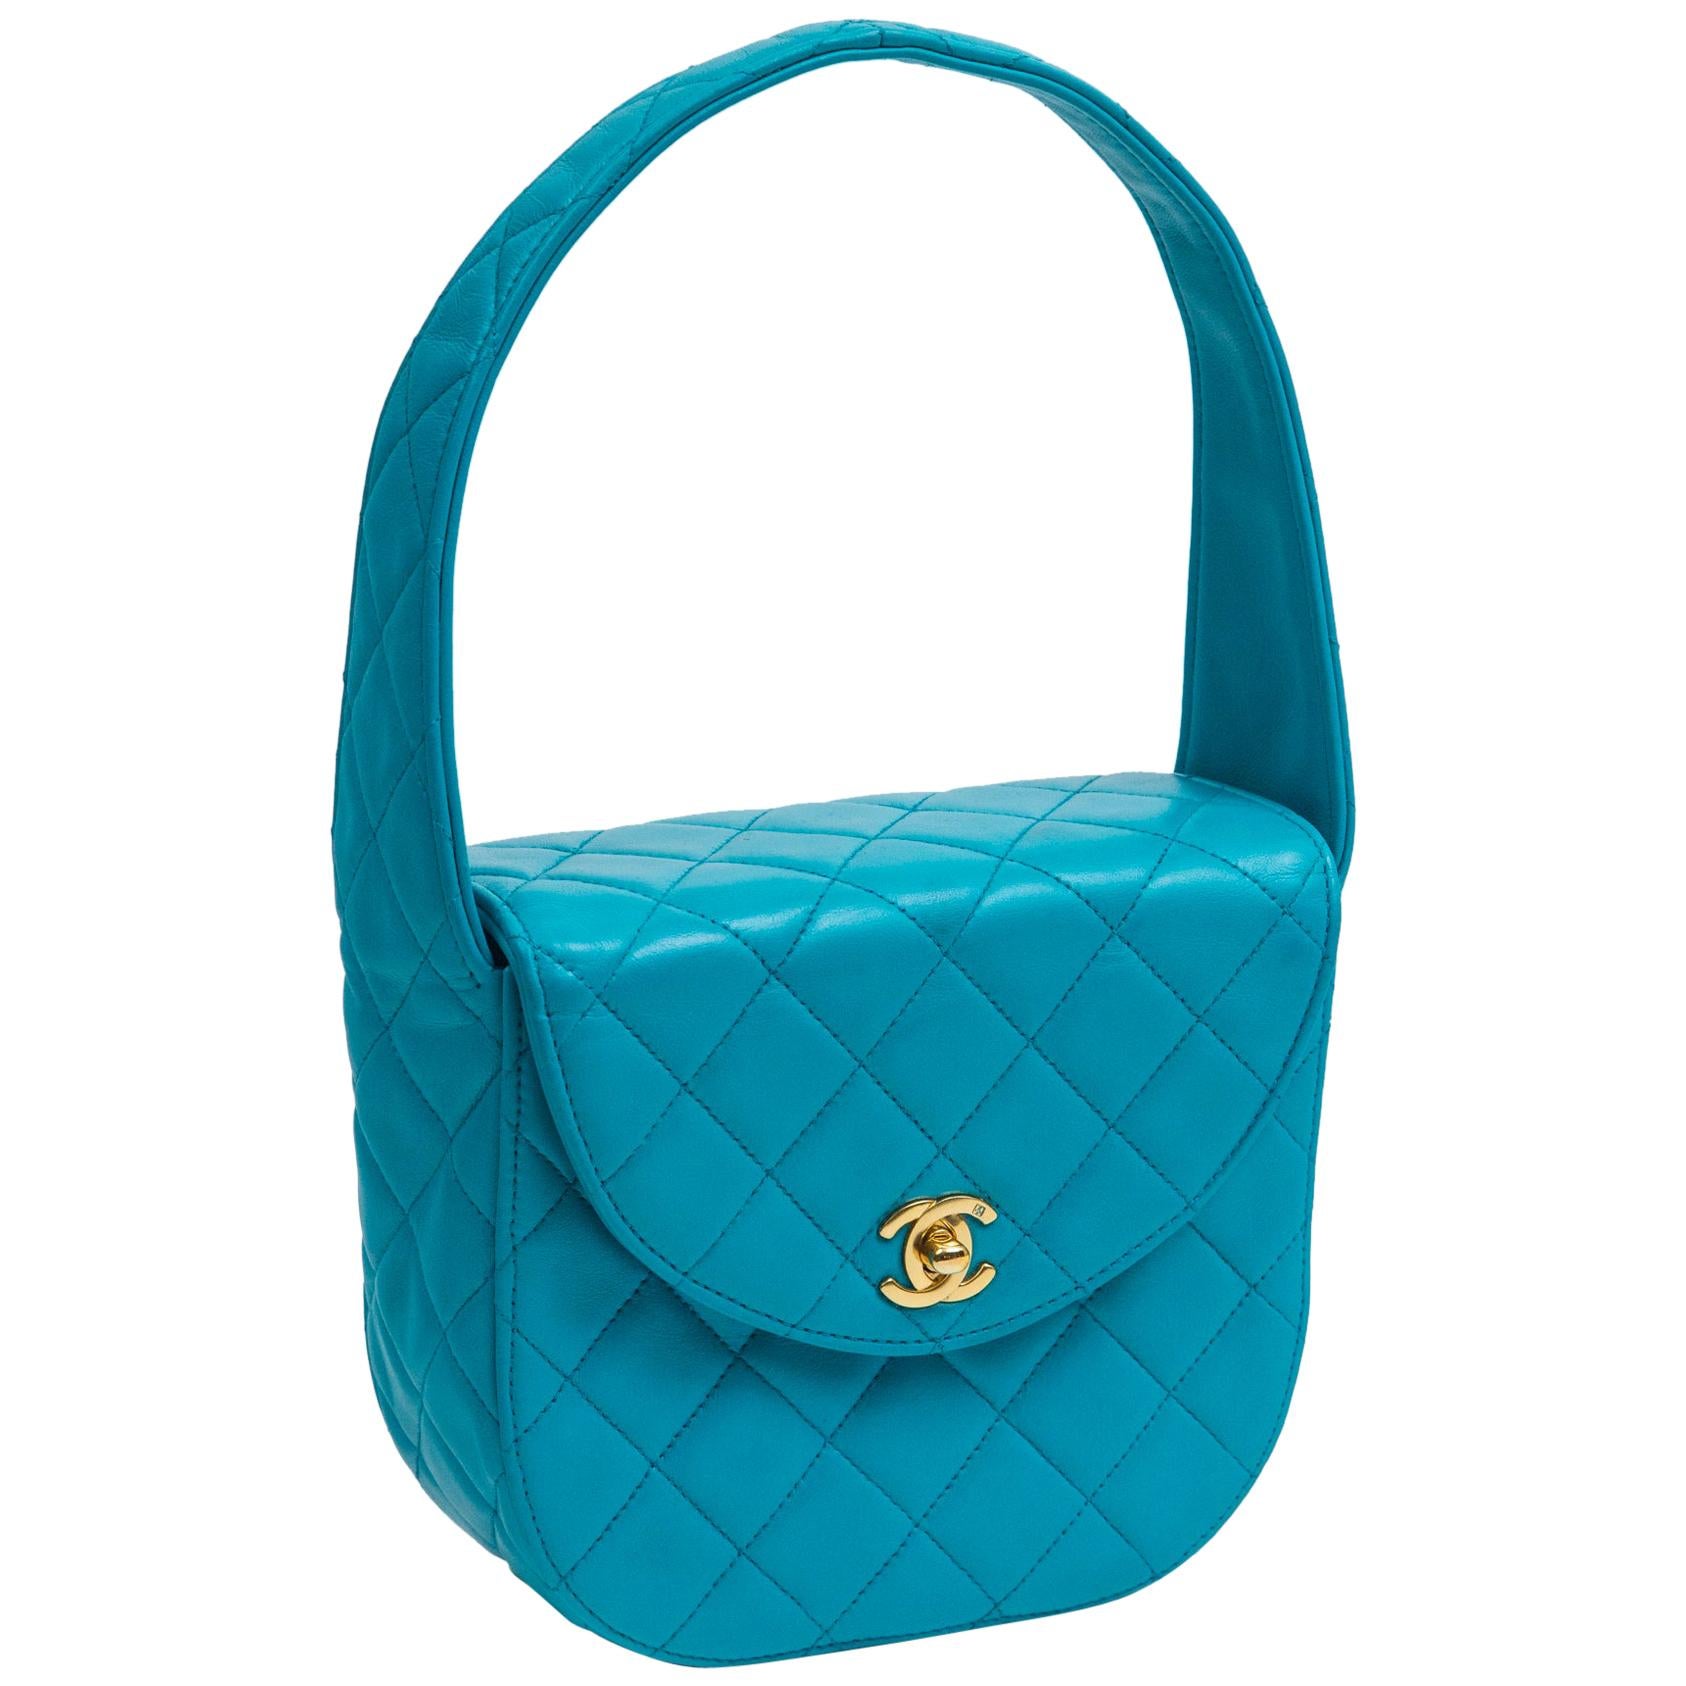 Chanel Blue Lambskin Rounded Handle Purse, 1990's